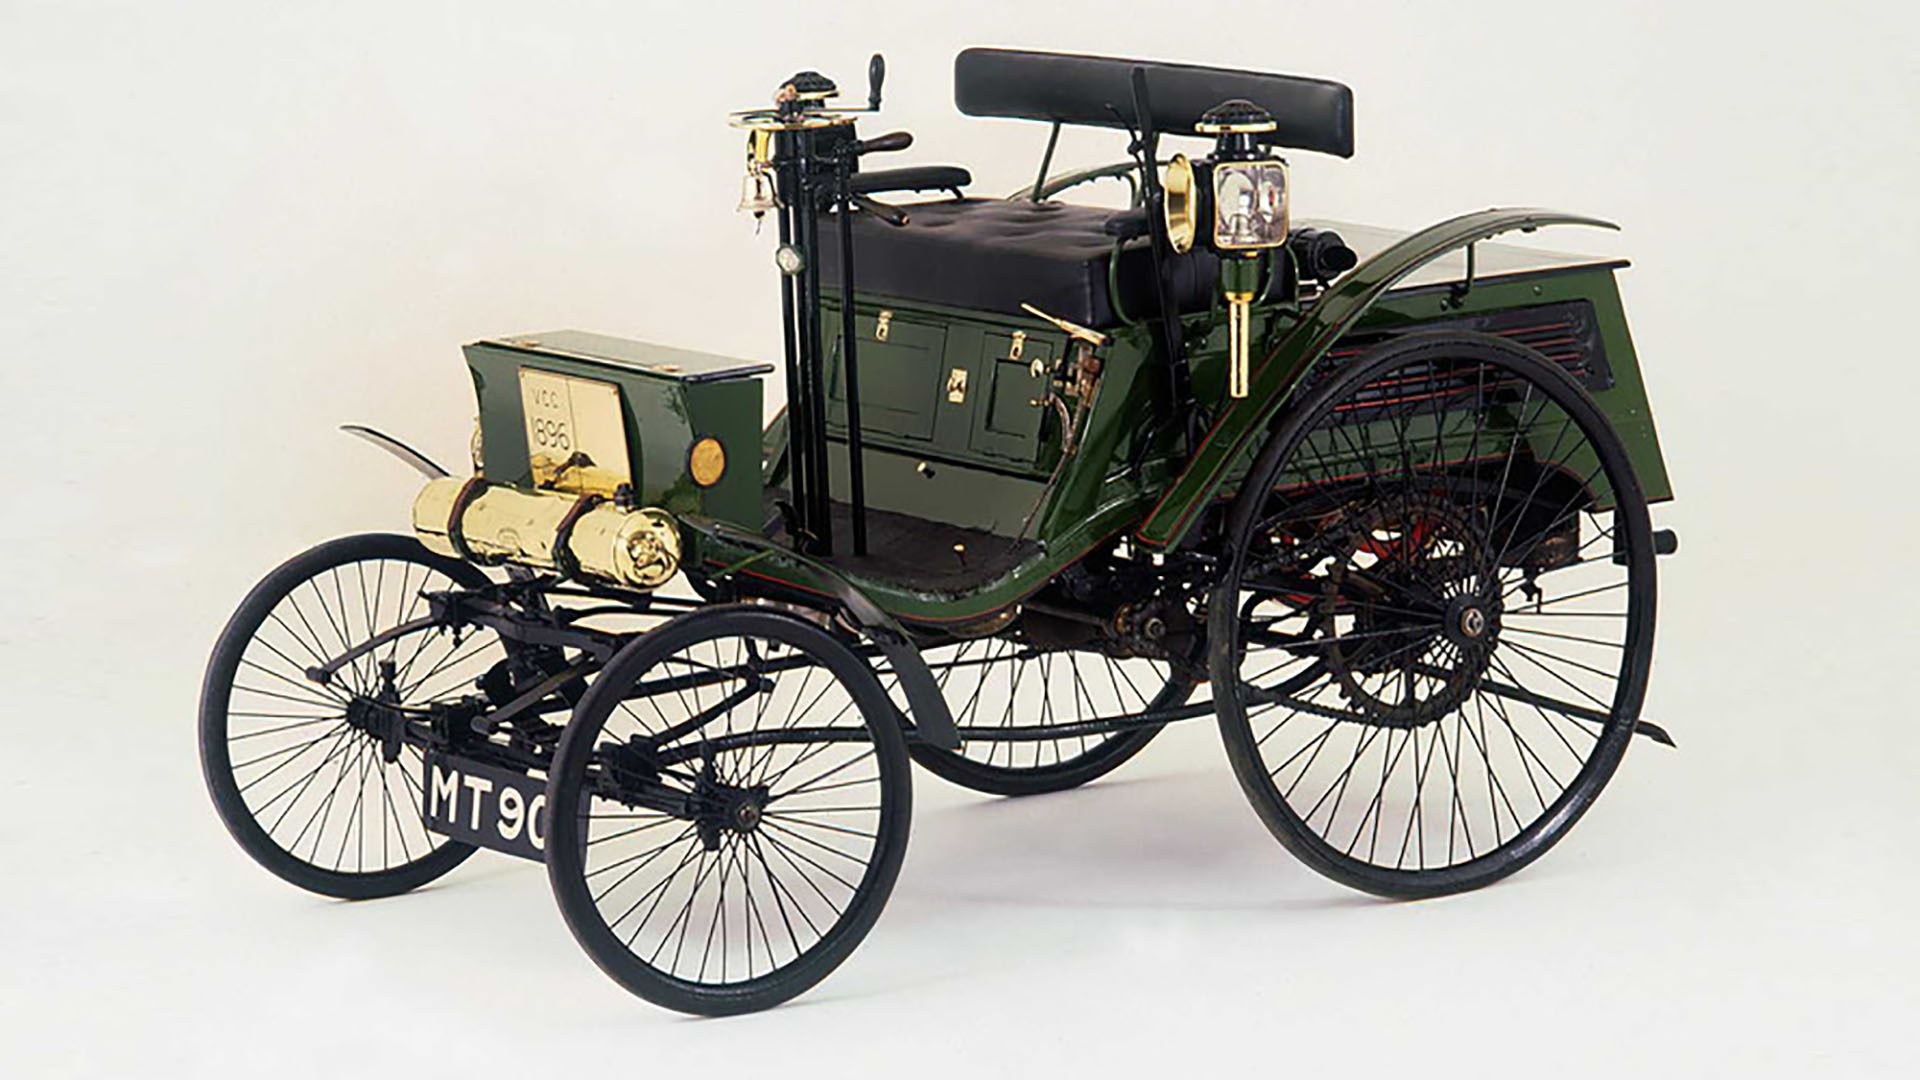 1896 Arnold Benz Motor Carriage alleged to be first car to be caught speeding